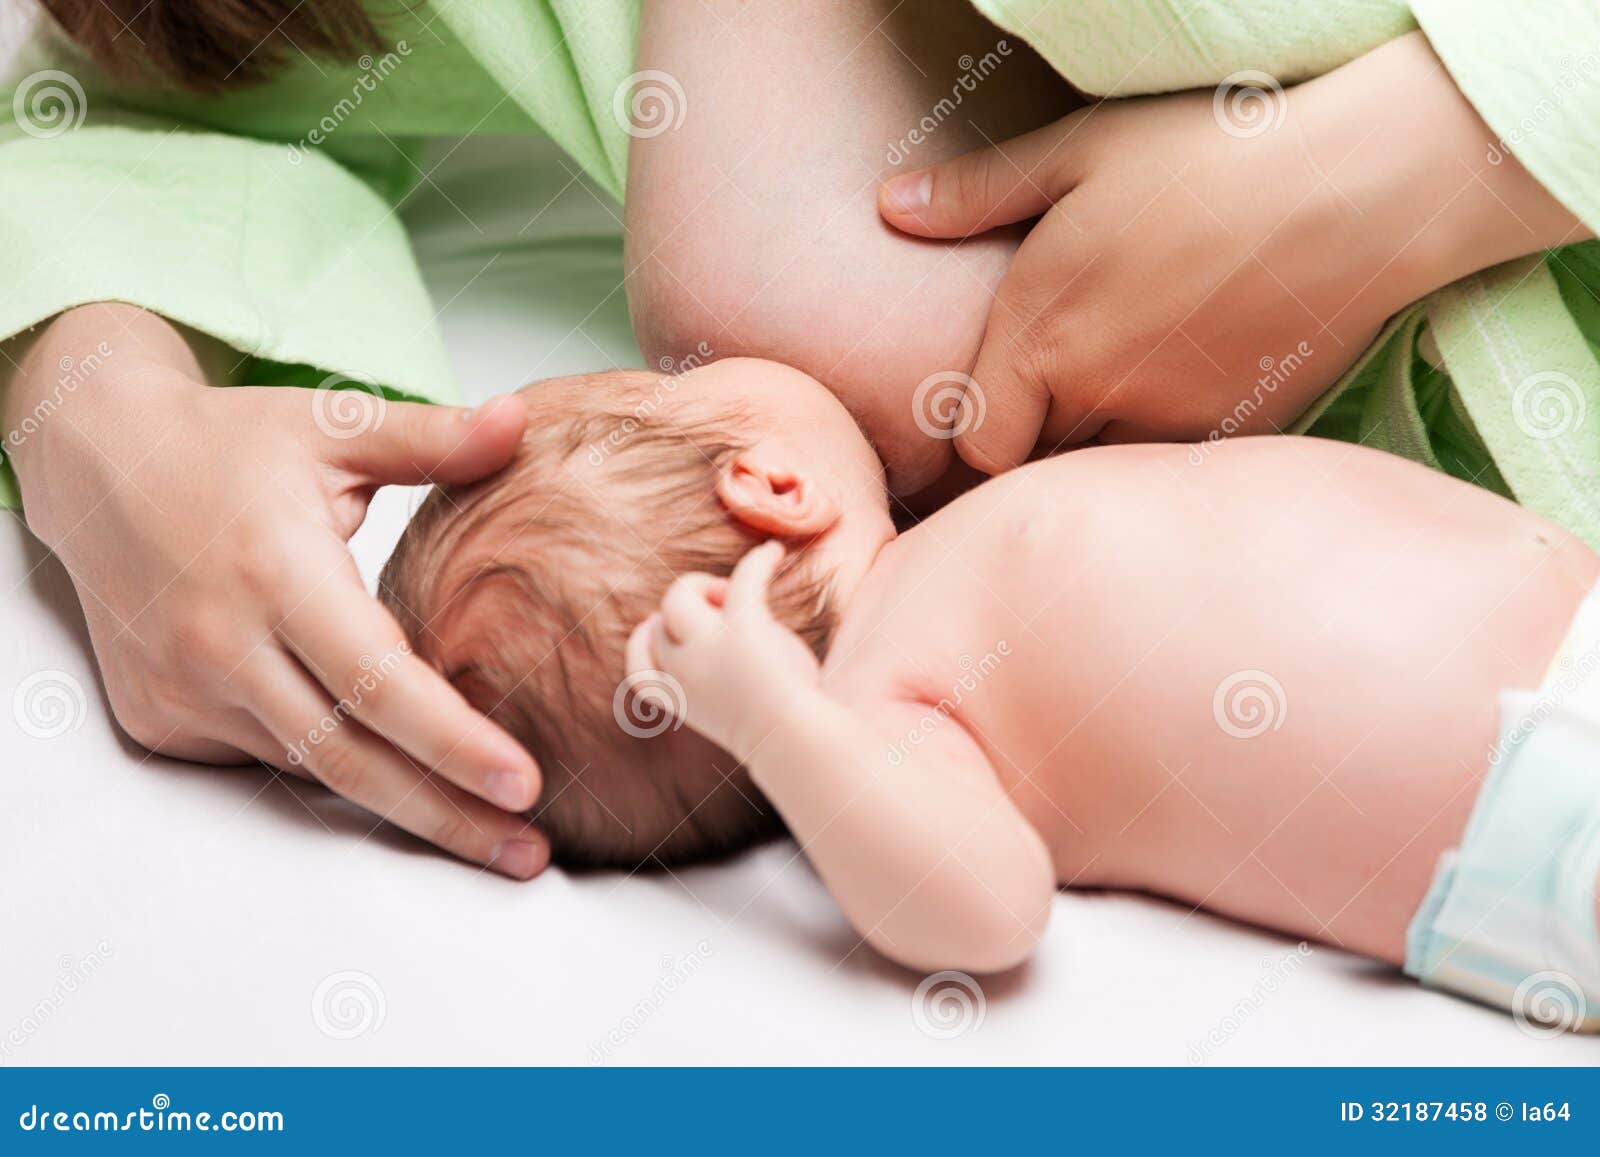 1300px x 957px - Little Newborn Baby Child Sucking Or Eating Mother Breast ...